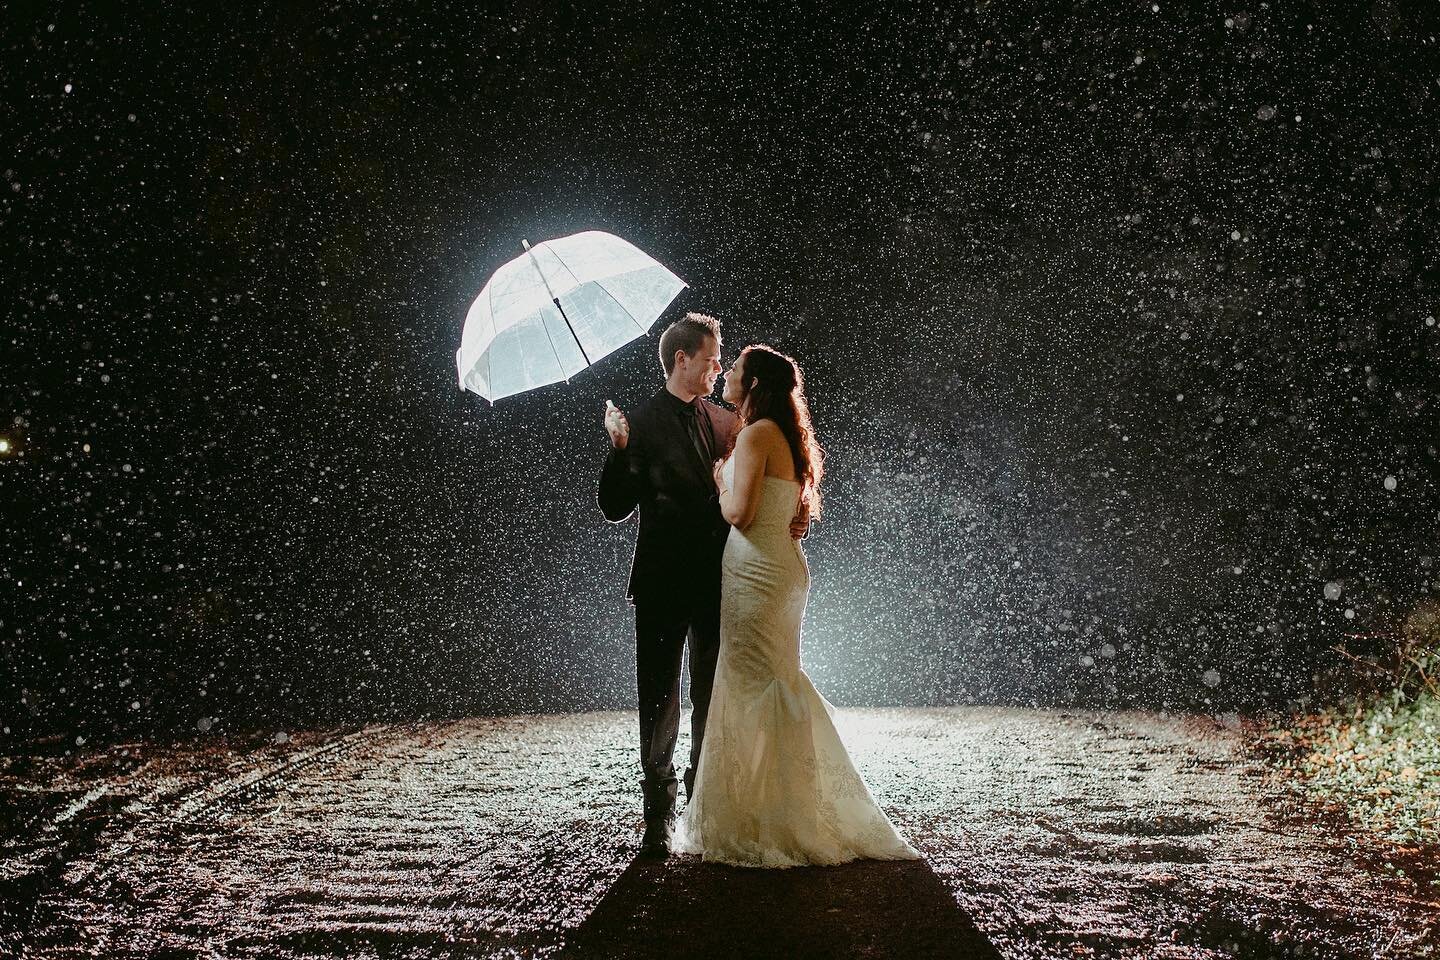 If you&rsquo;re worried about it raining on your wedding day&hellip;&hellip; don&rsquo;t😁 
.
..
...
....
#vancouverengagement #elopementphottographer #vancouverweddingphotographer #vancouverphotographer #dirtybootsandmessyhair #belovedstories #wande